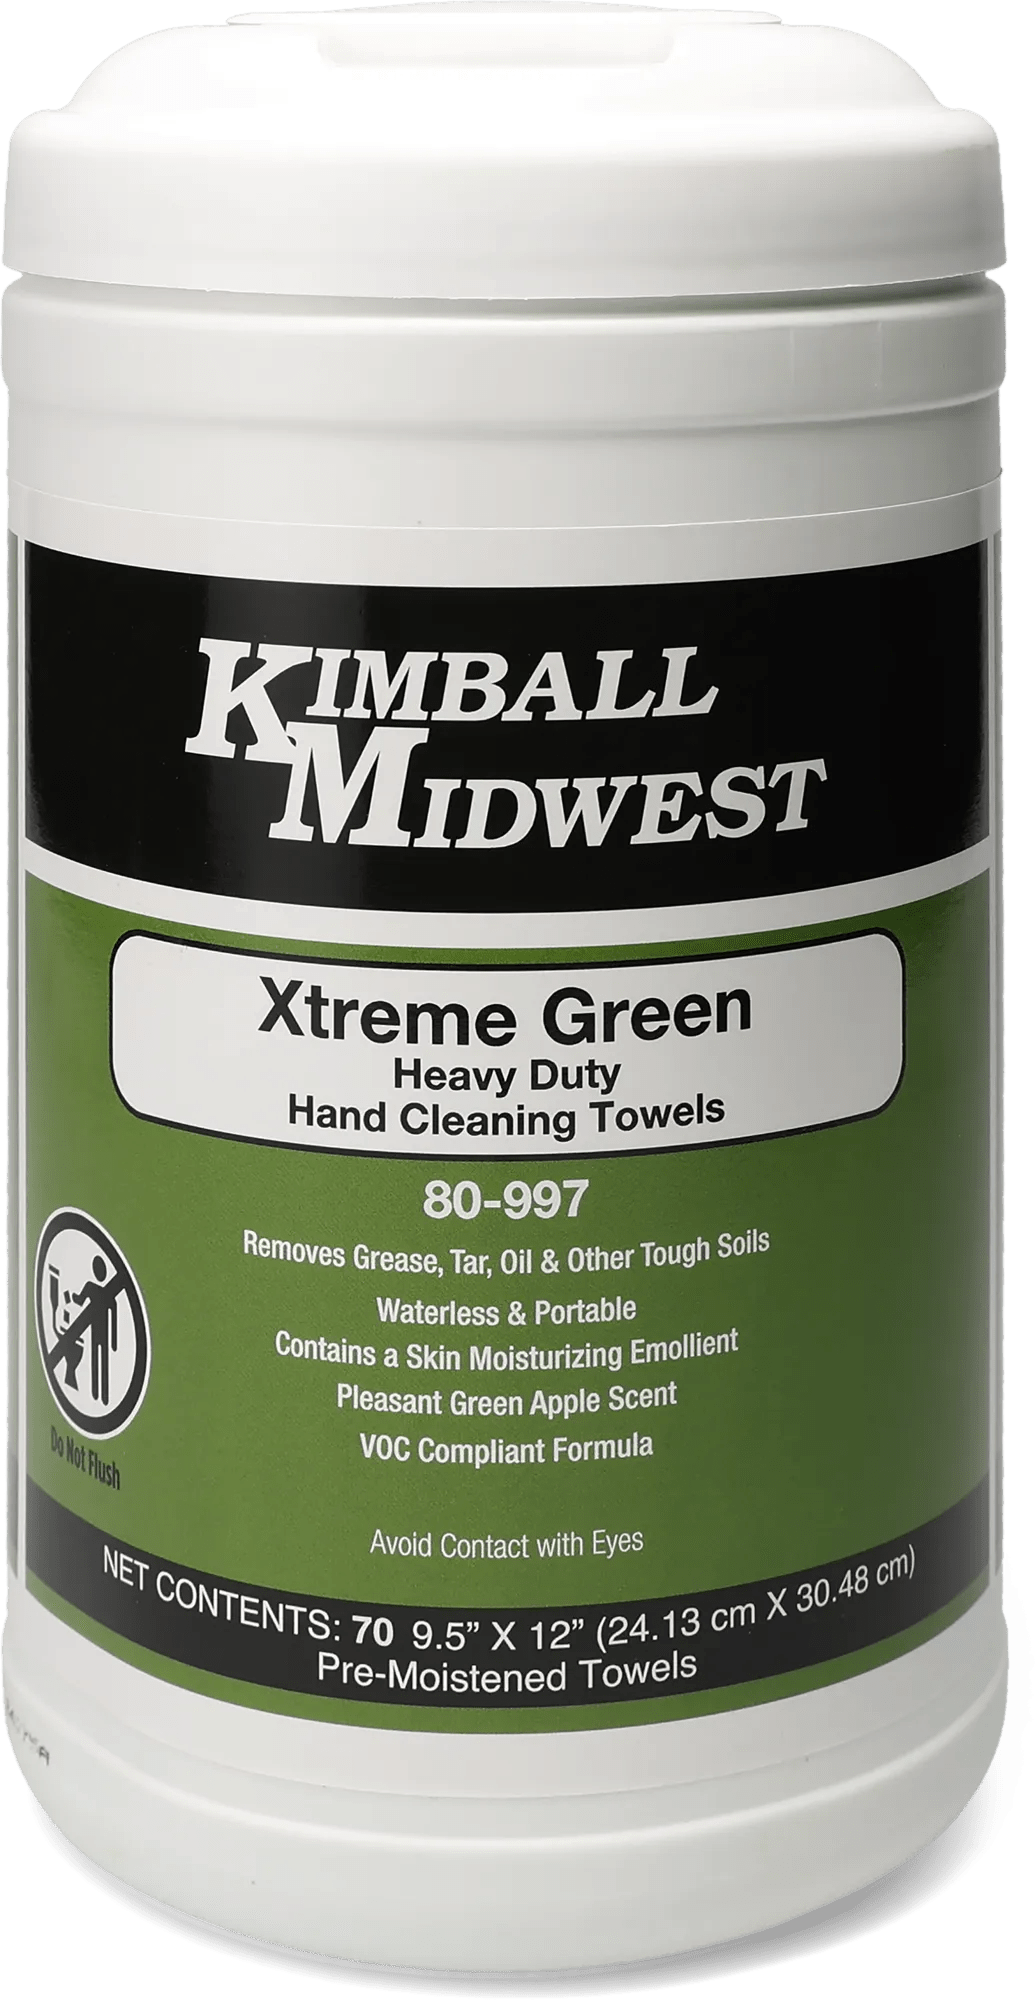 Xtreme Green Wipes with Caddy Bundle